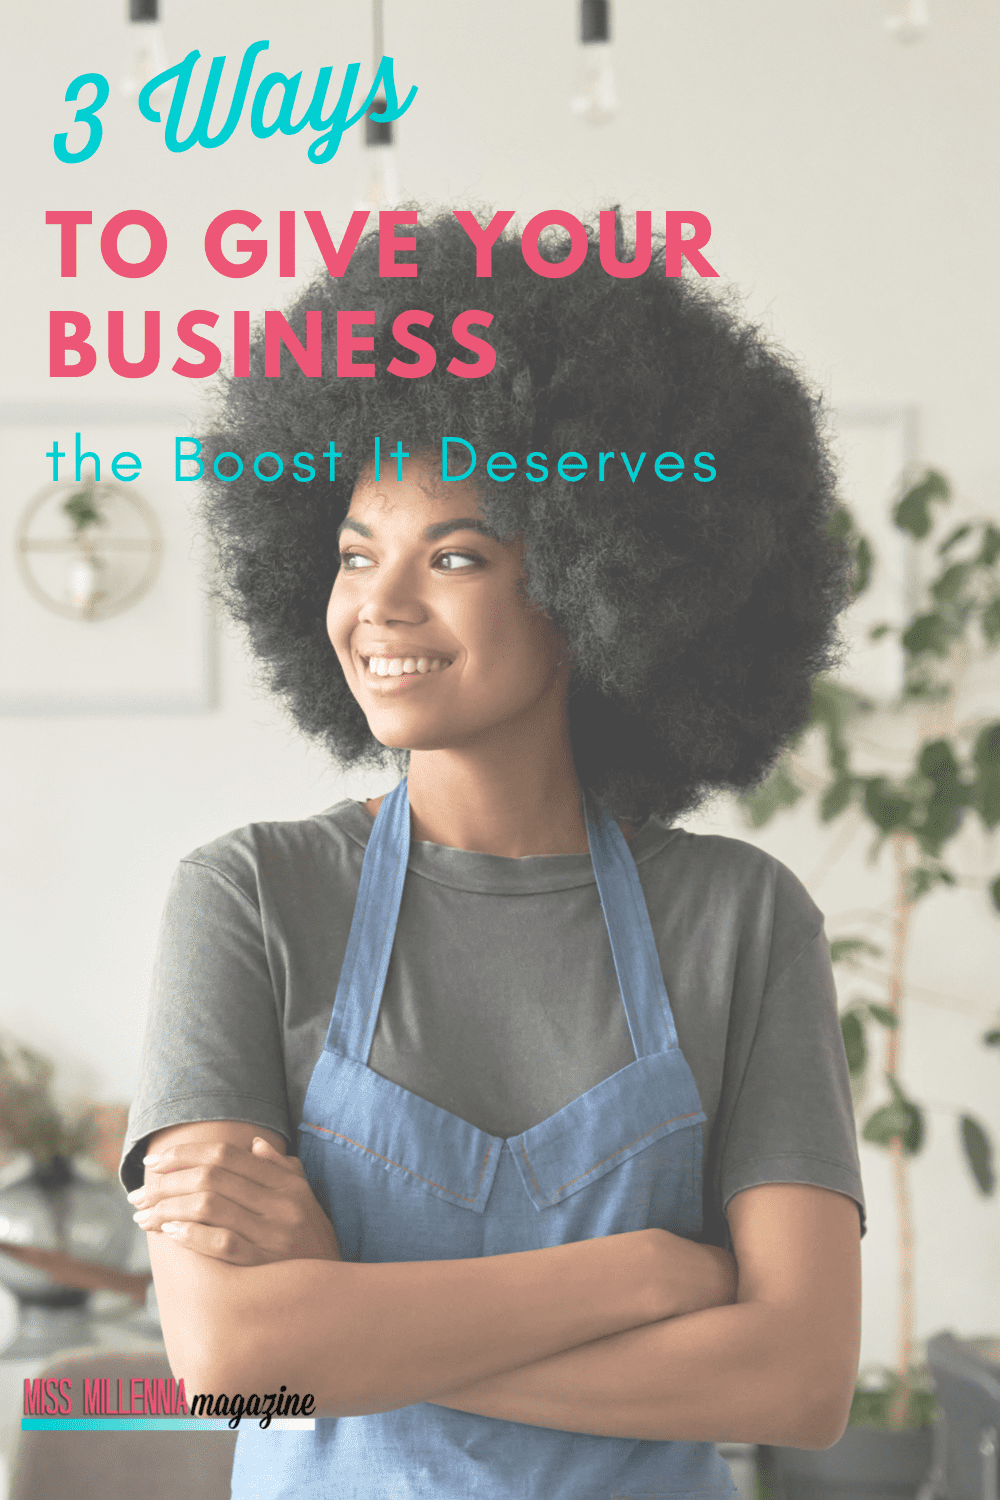 3 Ways to Give Your Business the Boost It Deserves